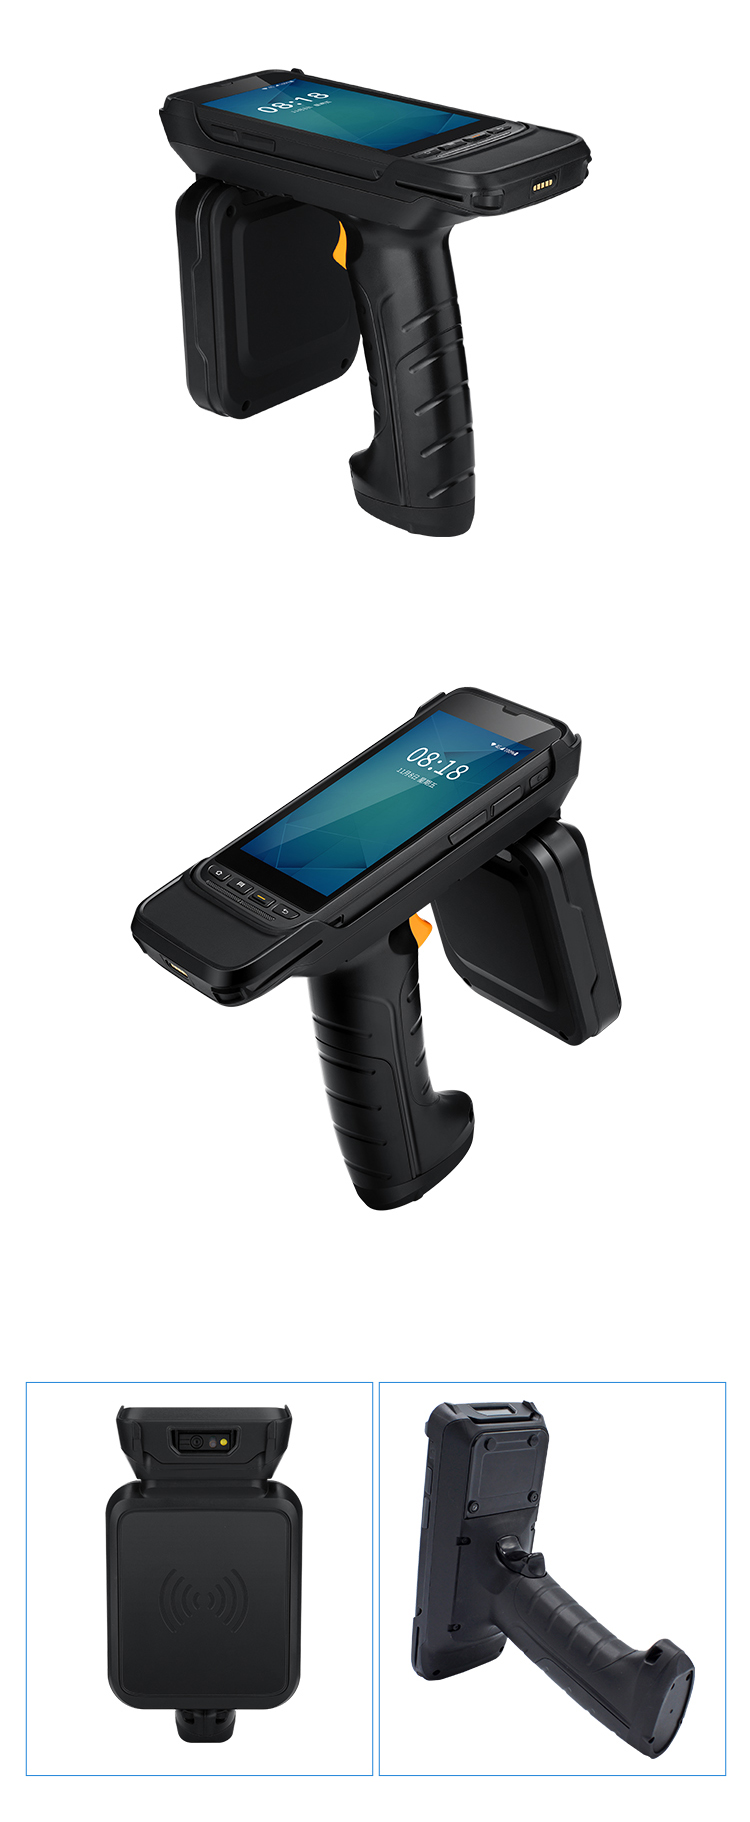 UHF RFID Reader for Android Warehouse Tracking Management Handheld Mobile Terminal